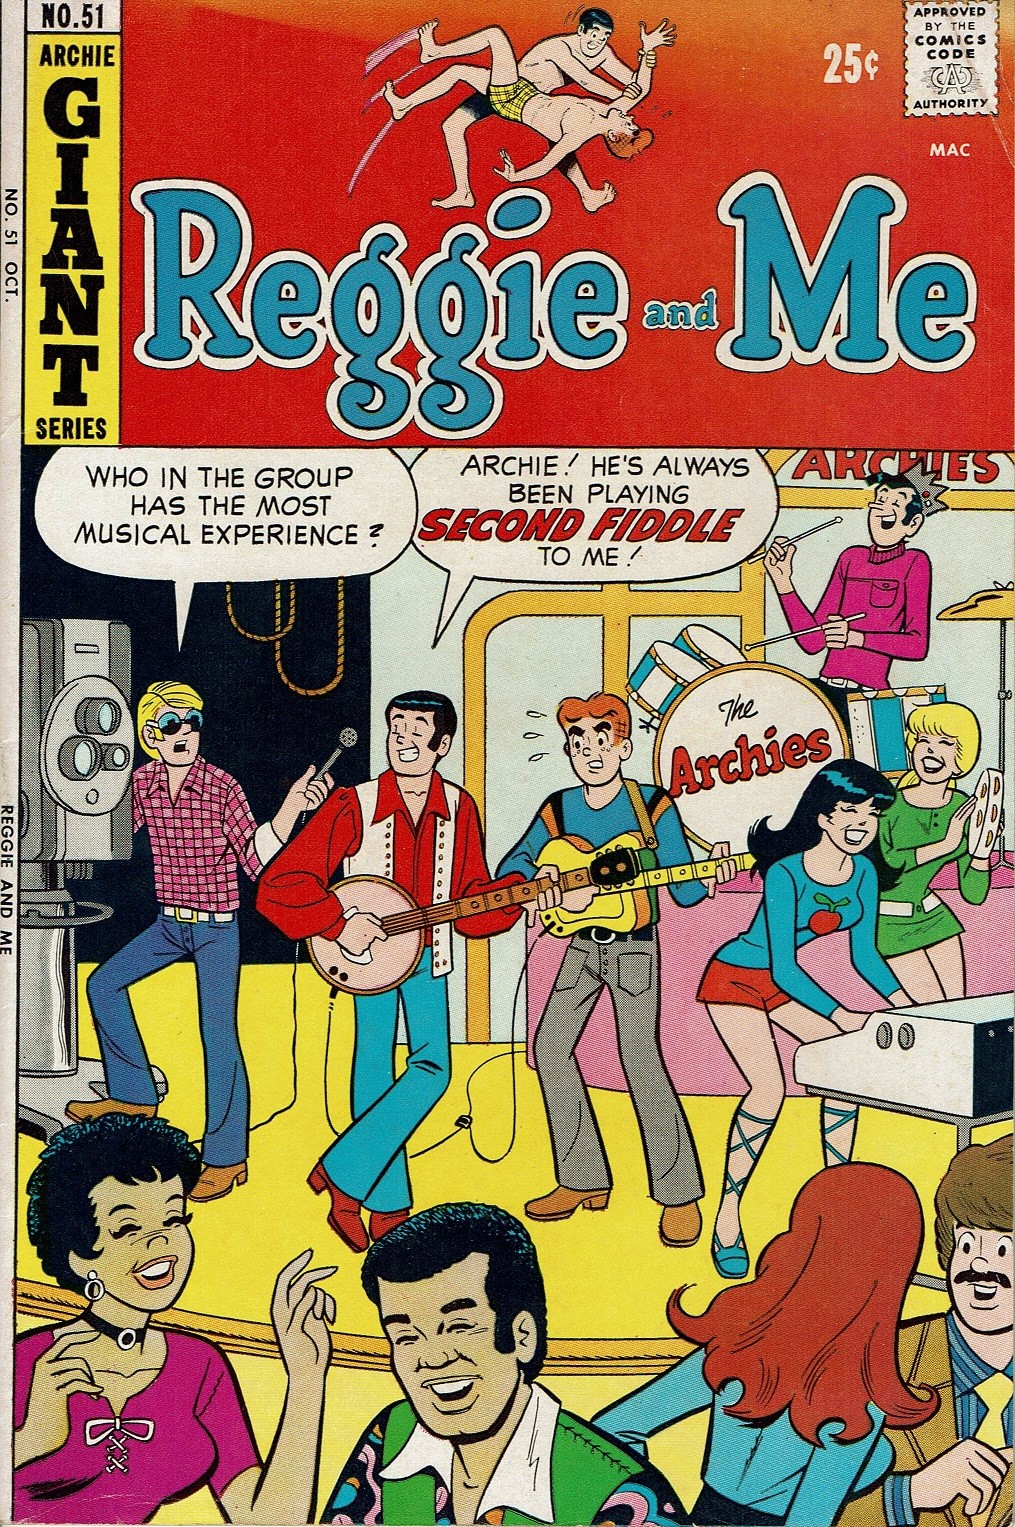 Reggie and Me (1966) issue 51 - Page 1